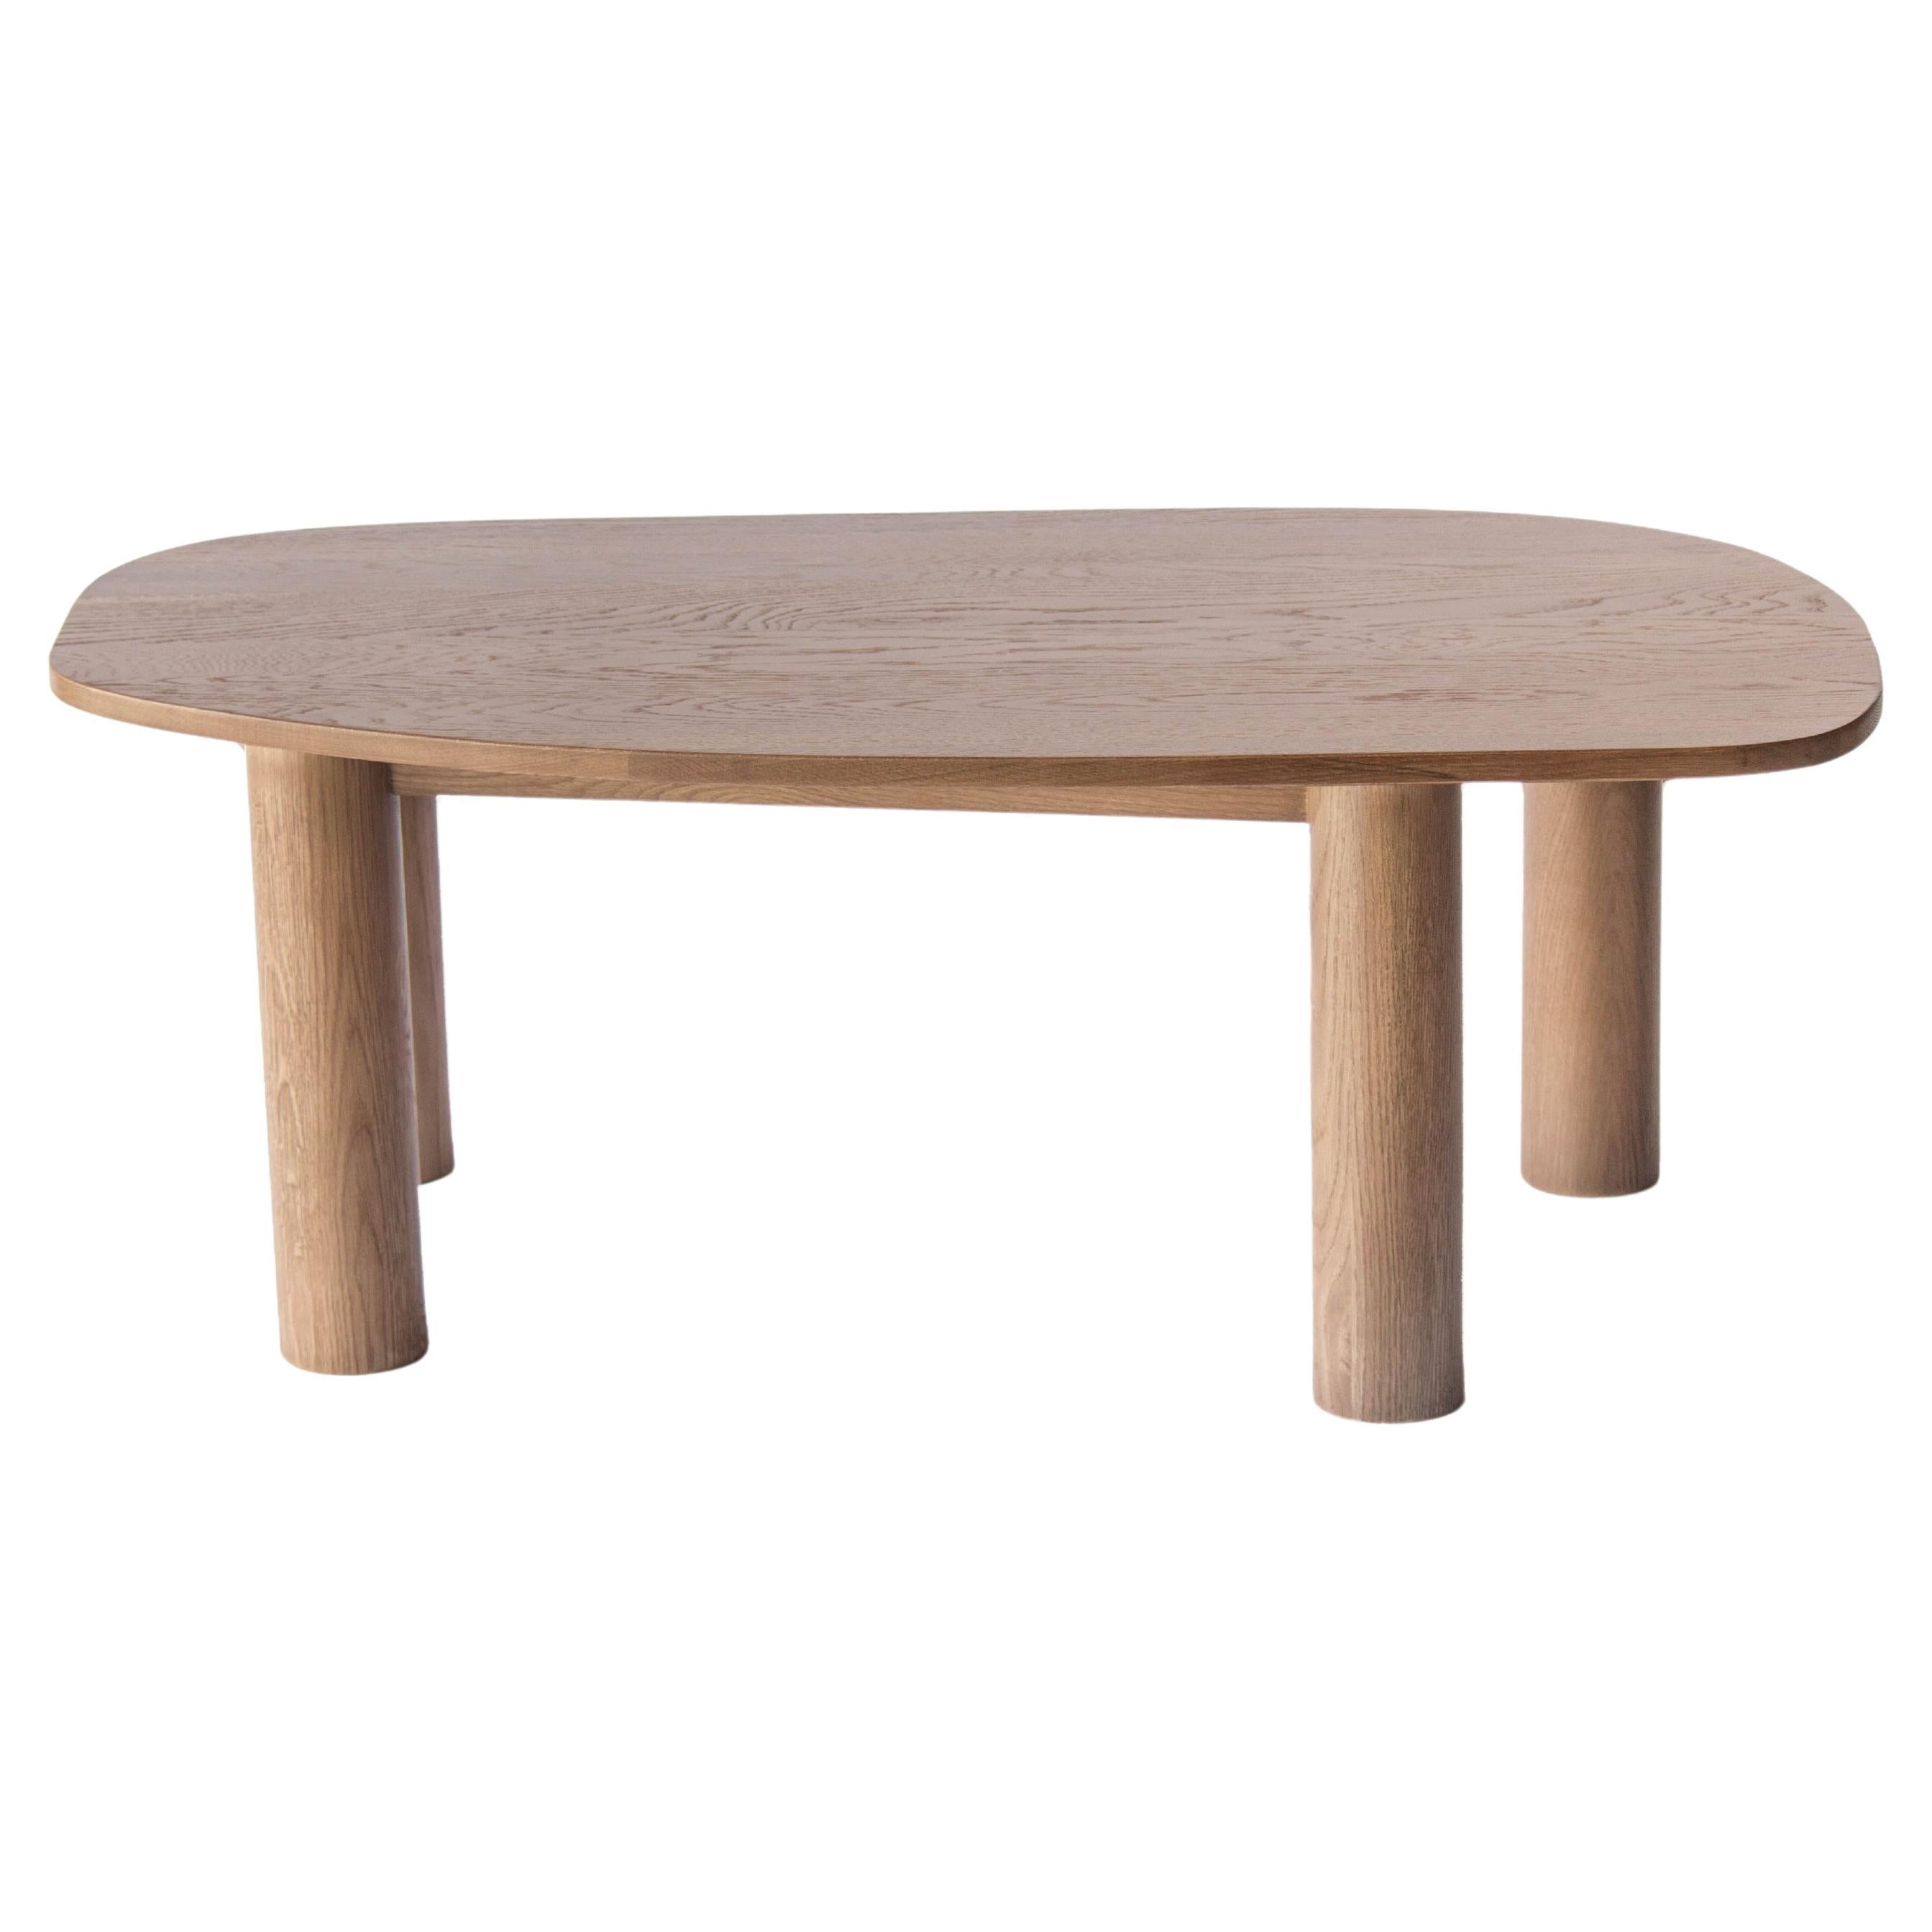 Ohm Coffee Table 32" by Sun at Six, Sienna Coffee Table in Wood